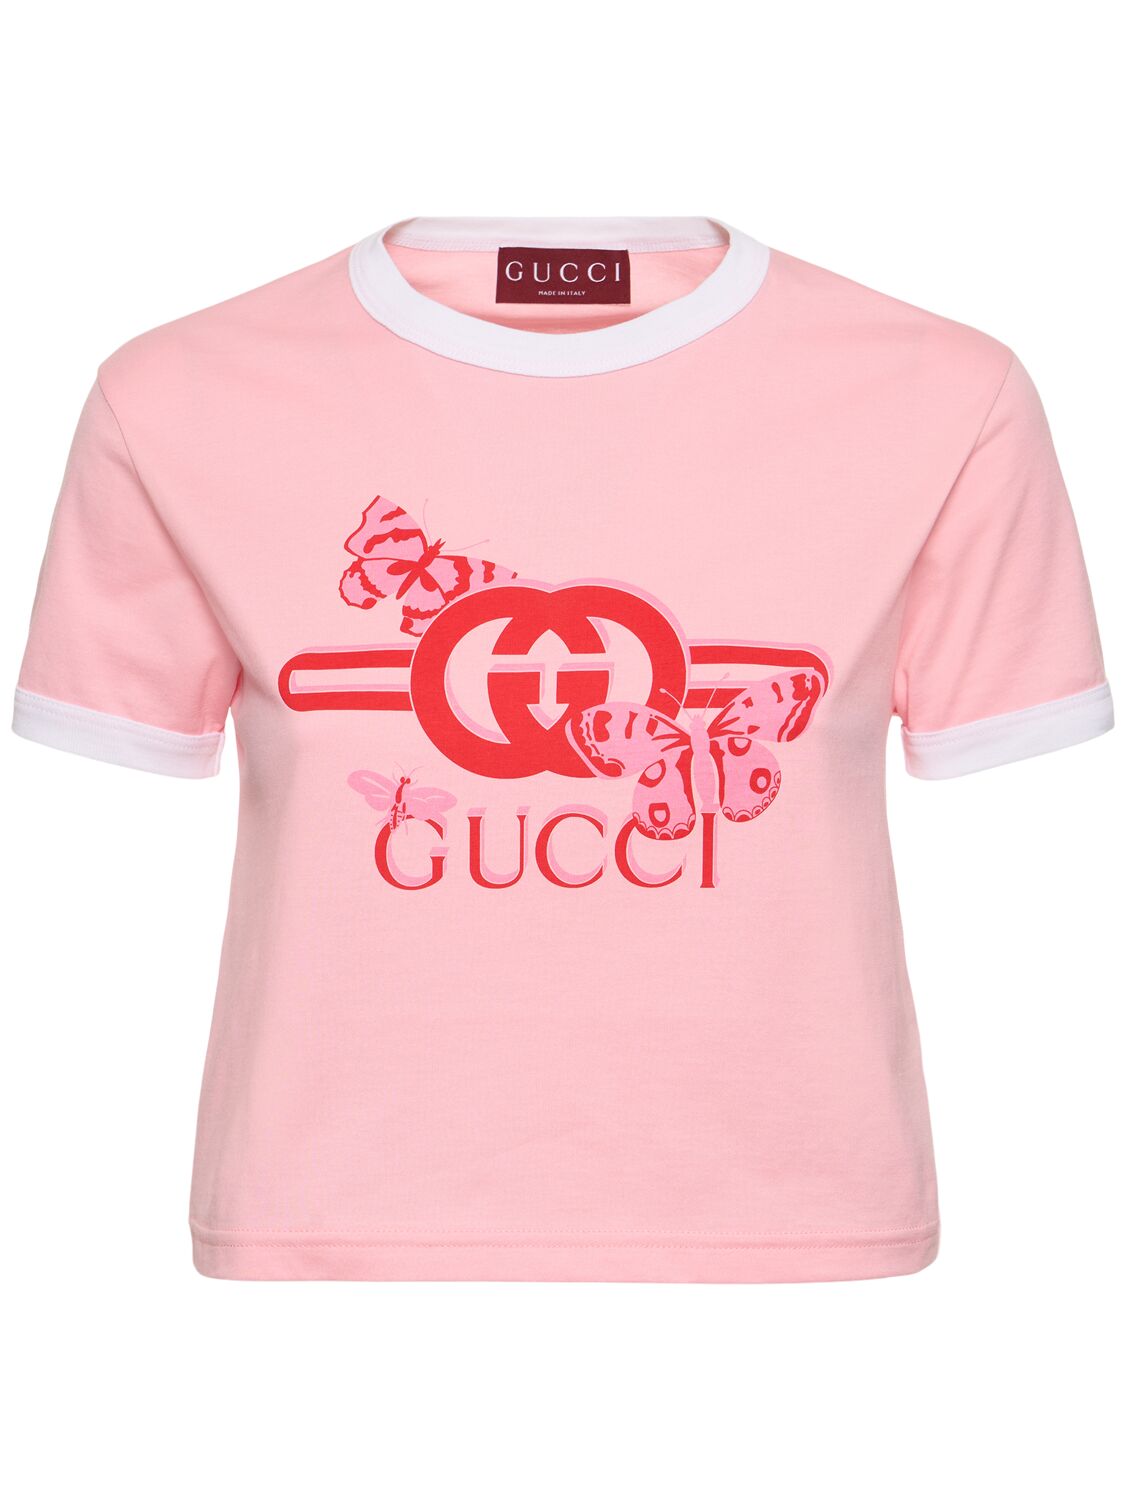 Gucci New 90s Cotton Jersey T-shirt In Sugar Pink